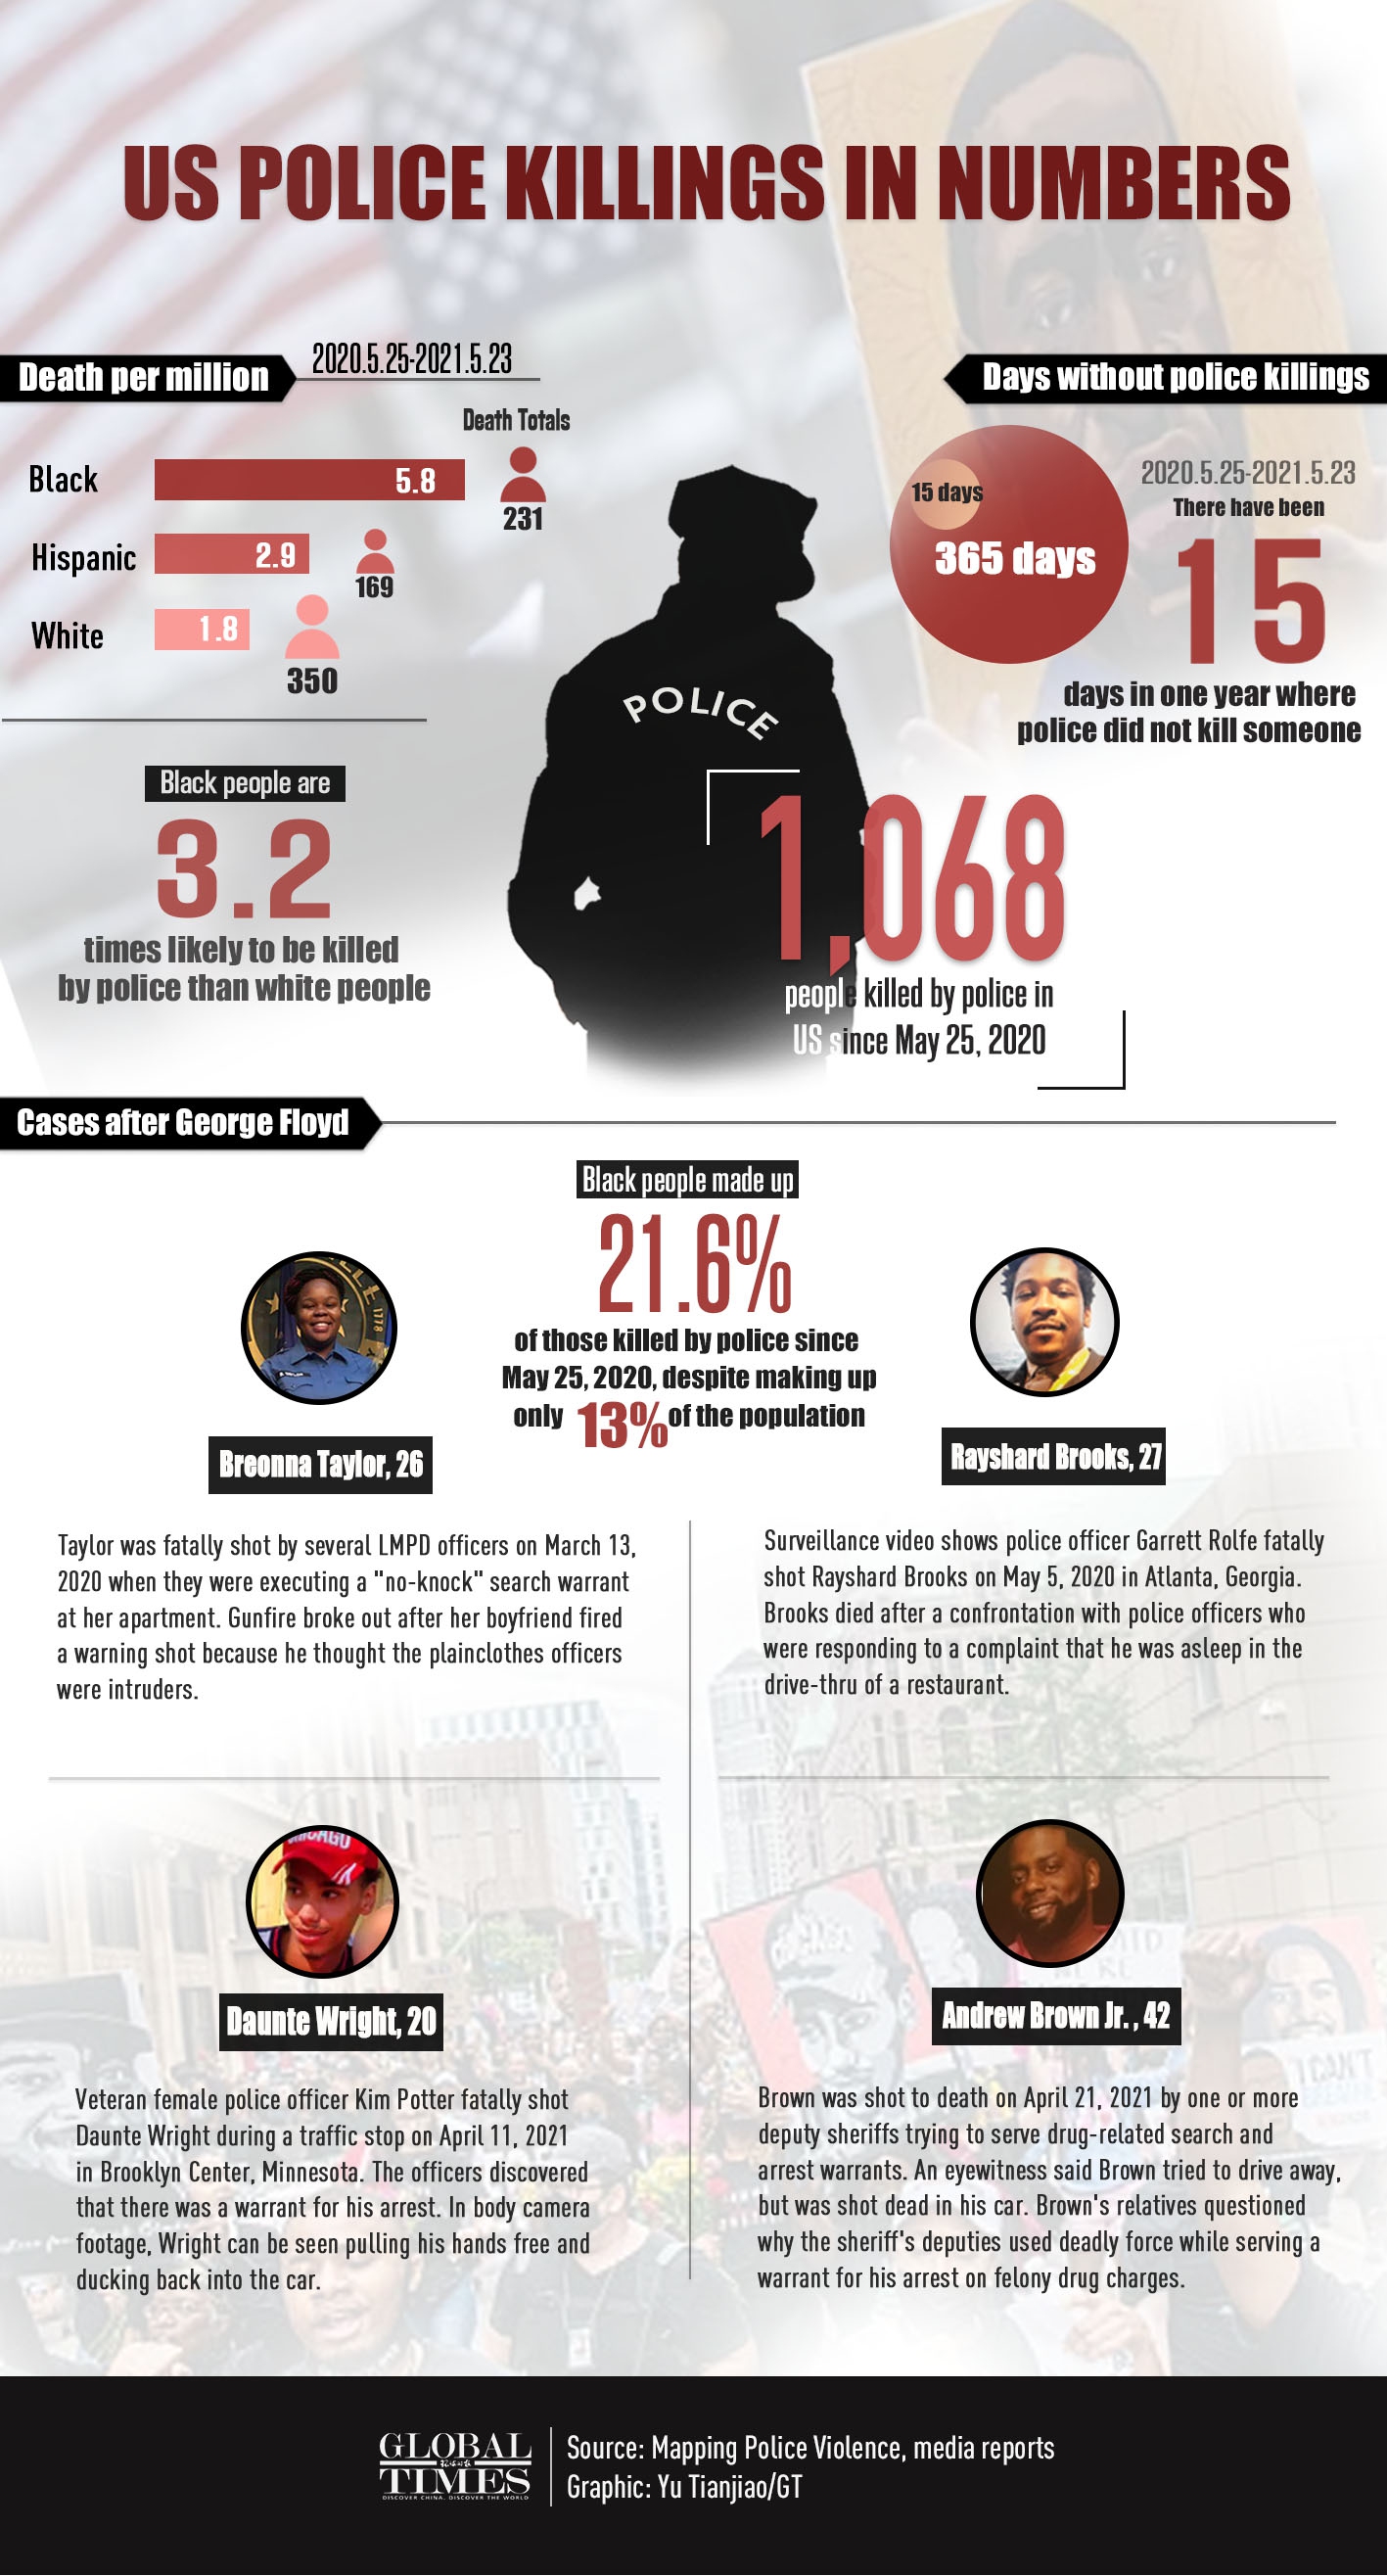 One year on: 231 black Americans have been killed by US police since George Floyd's tragic death on May 25, 2020, making up nearly 22% of those killed by police, despite being only 13% of the country's population.